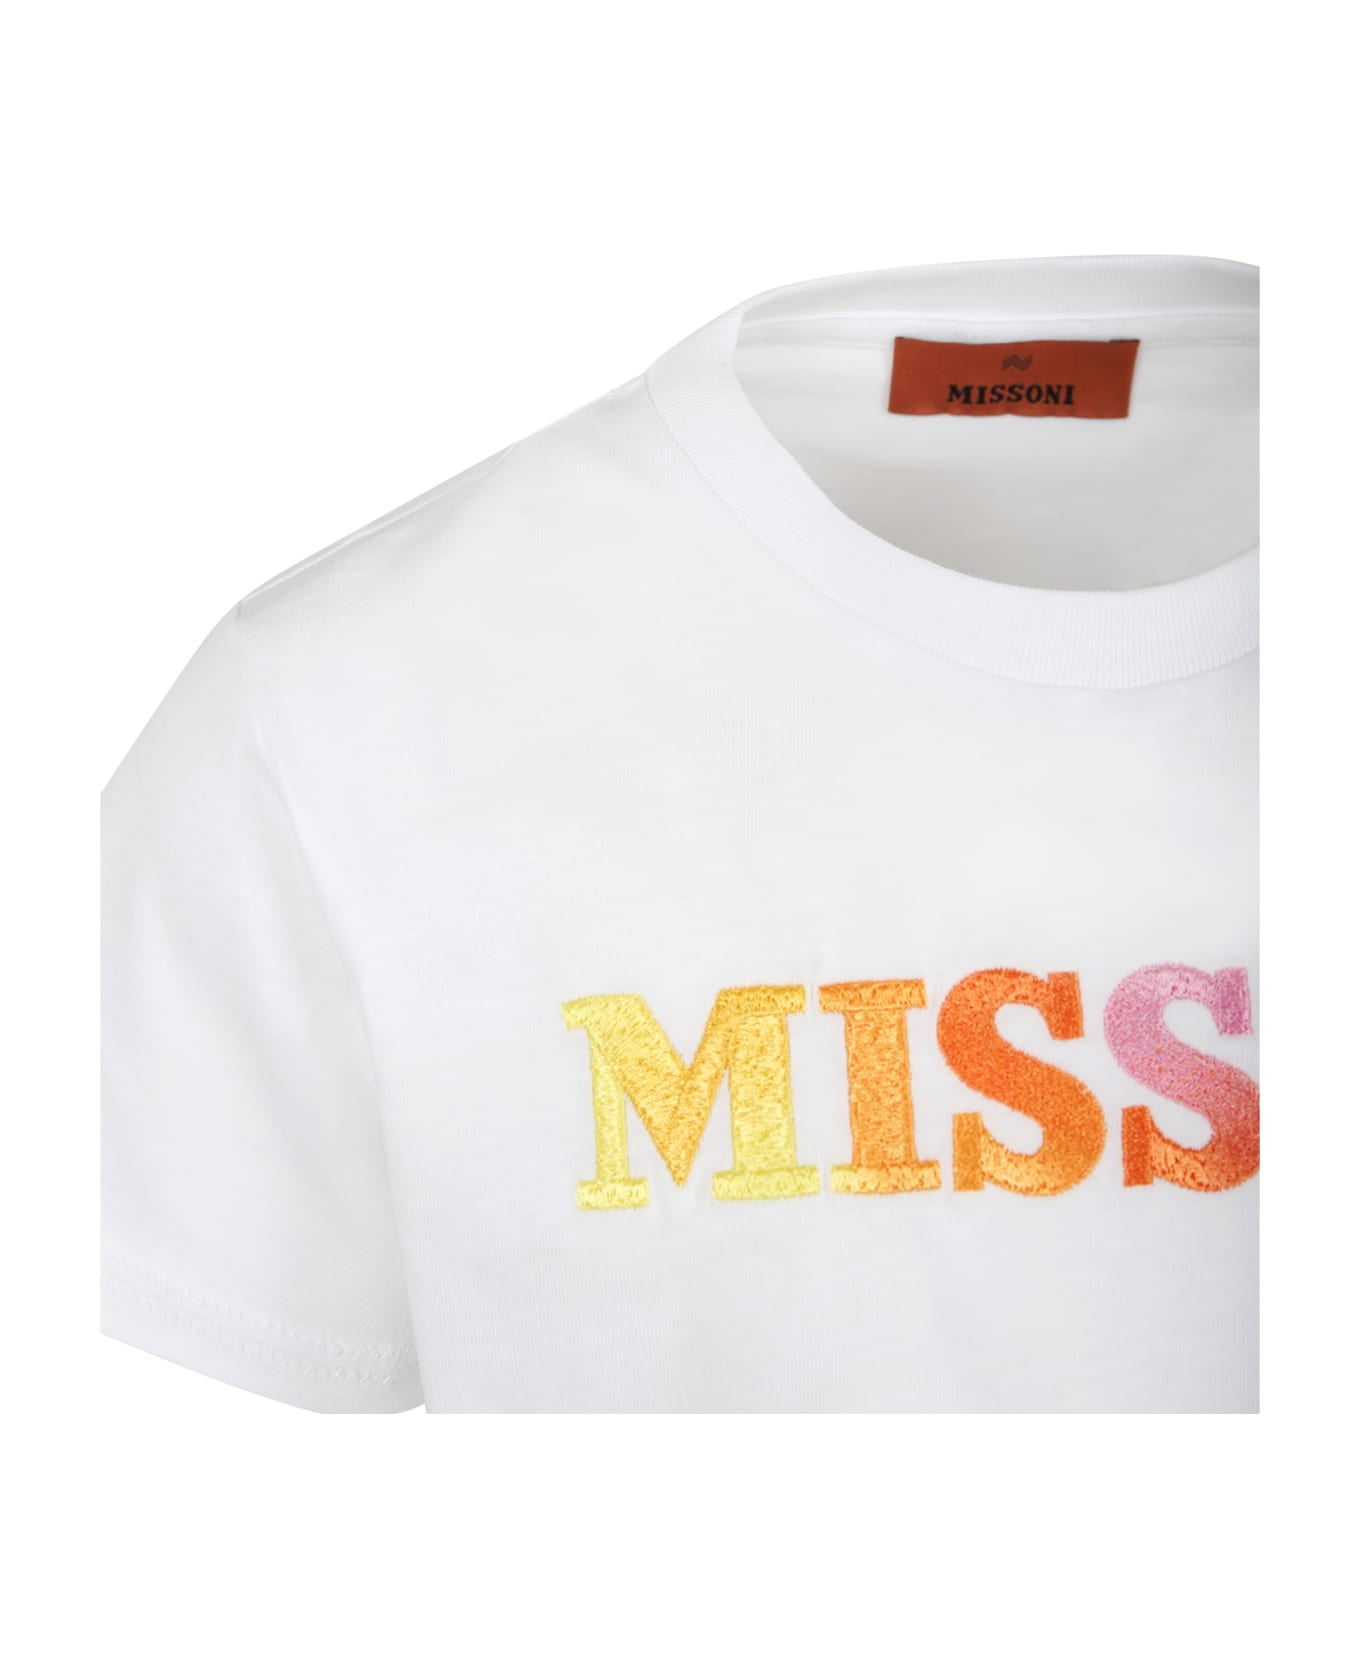 Missoni Kids White T-shirt For Girl With Embroidered Logo - White